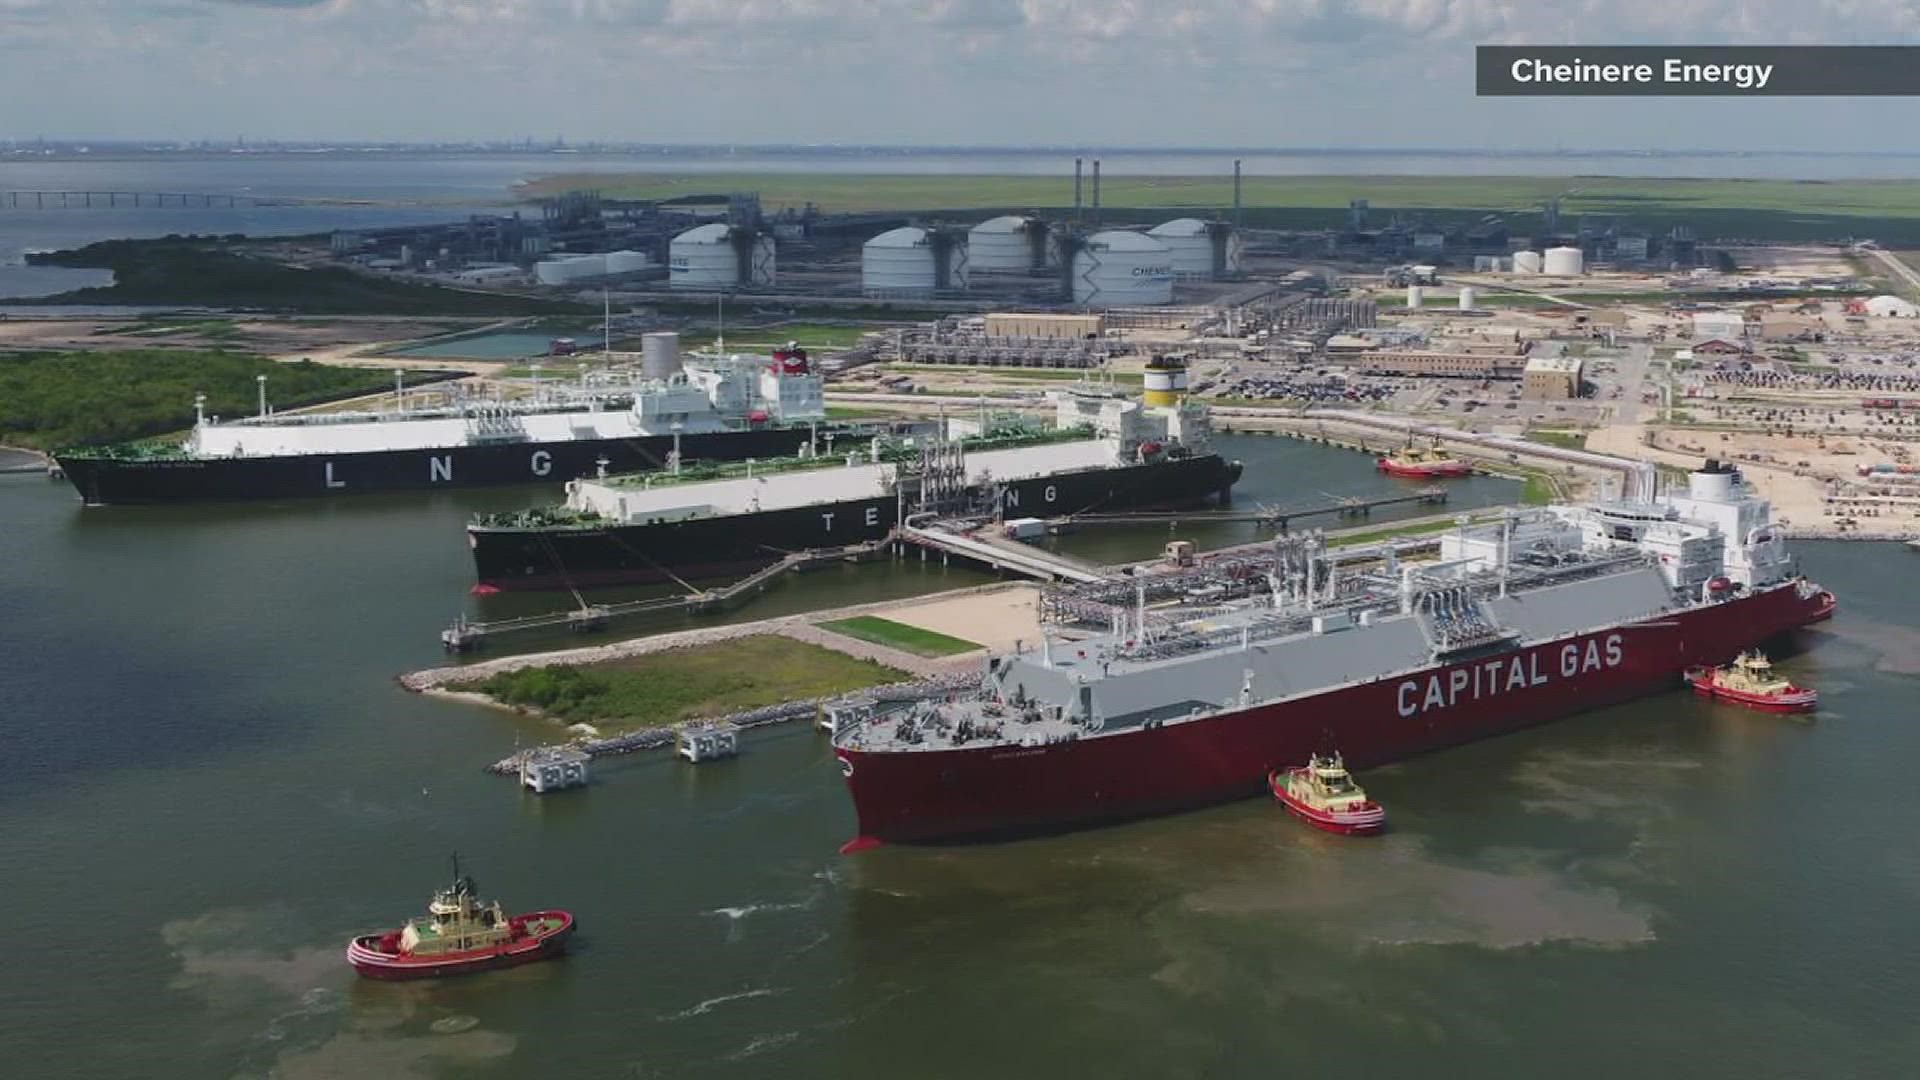 Early in September 2022 history was made when three LNG tankers were docked at the terminal at the same time.